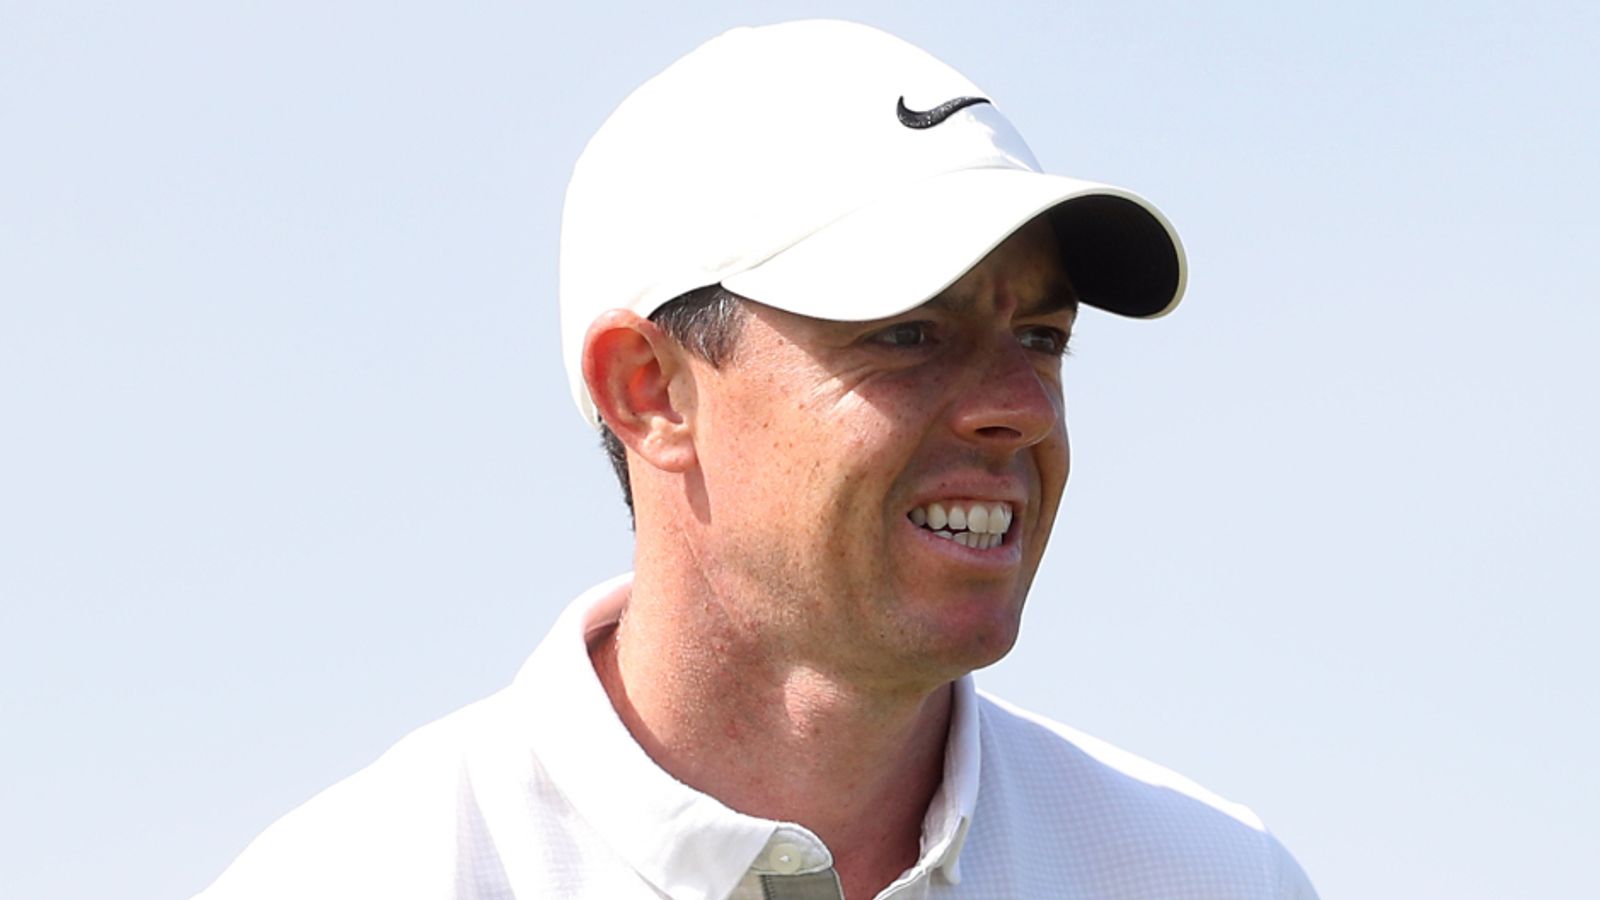 The 149th Open: Rory McIlroy birdies 14 and 18 to scramble a level-par 70 on day one in Sandwich